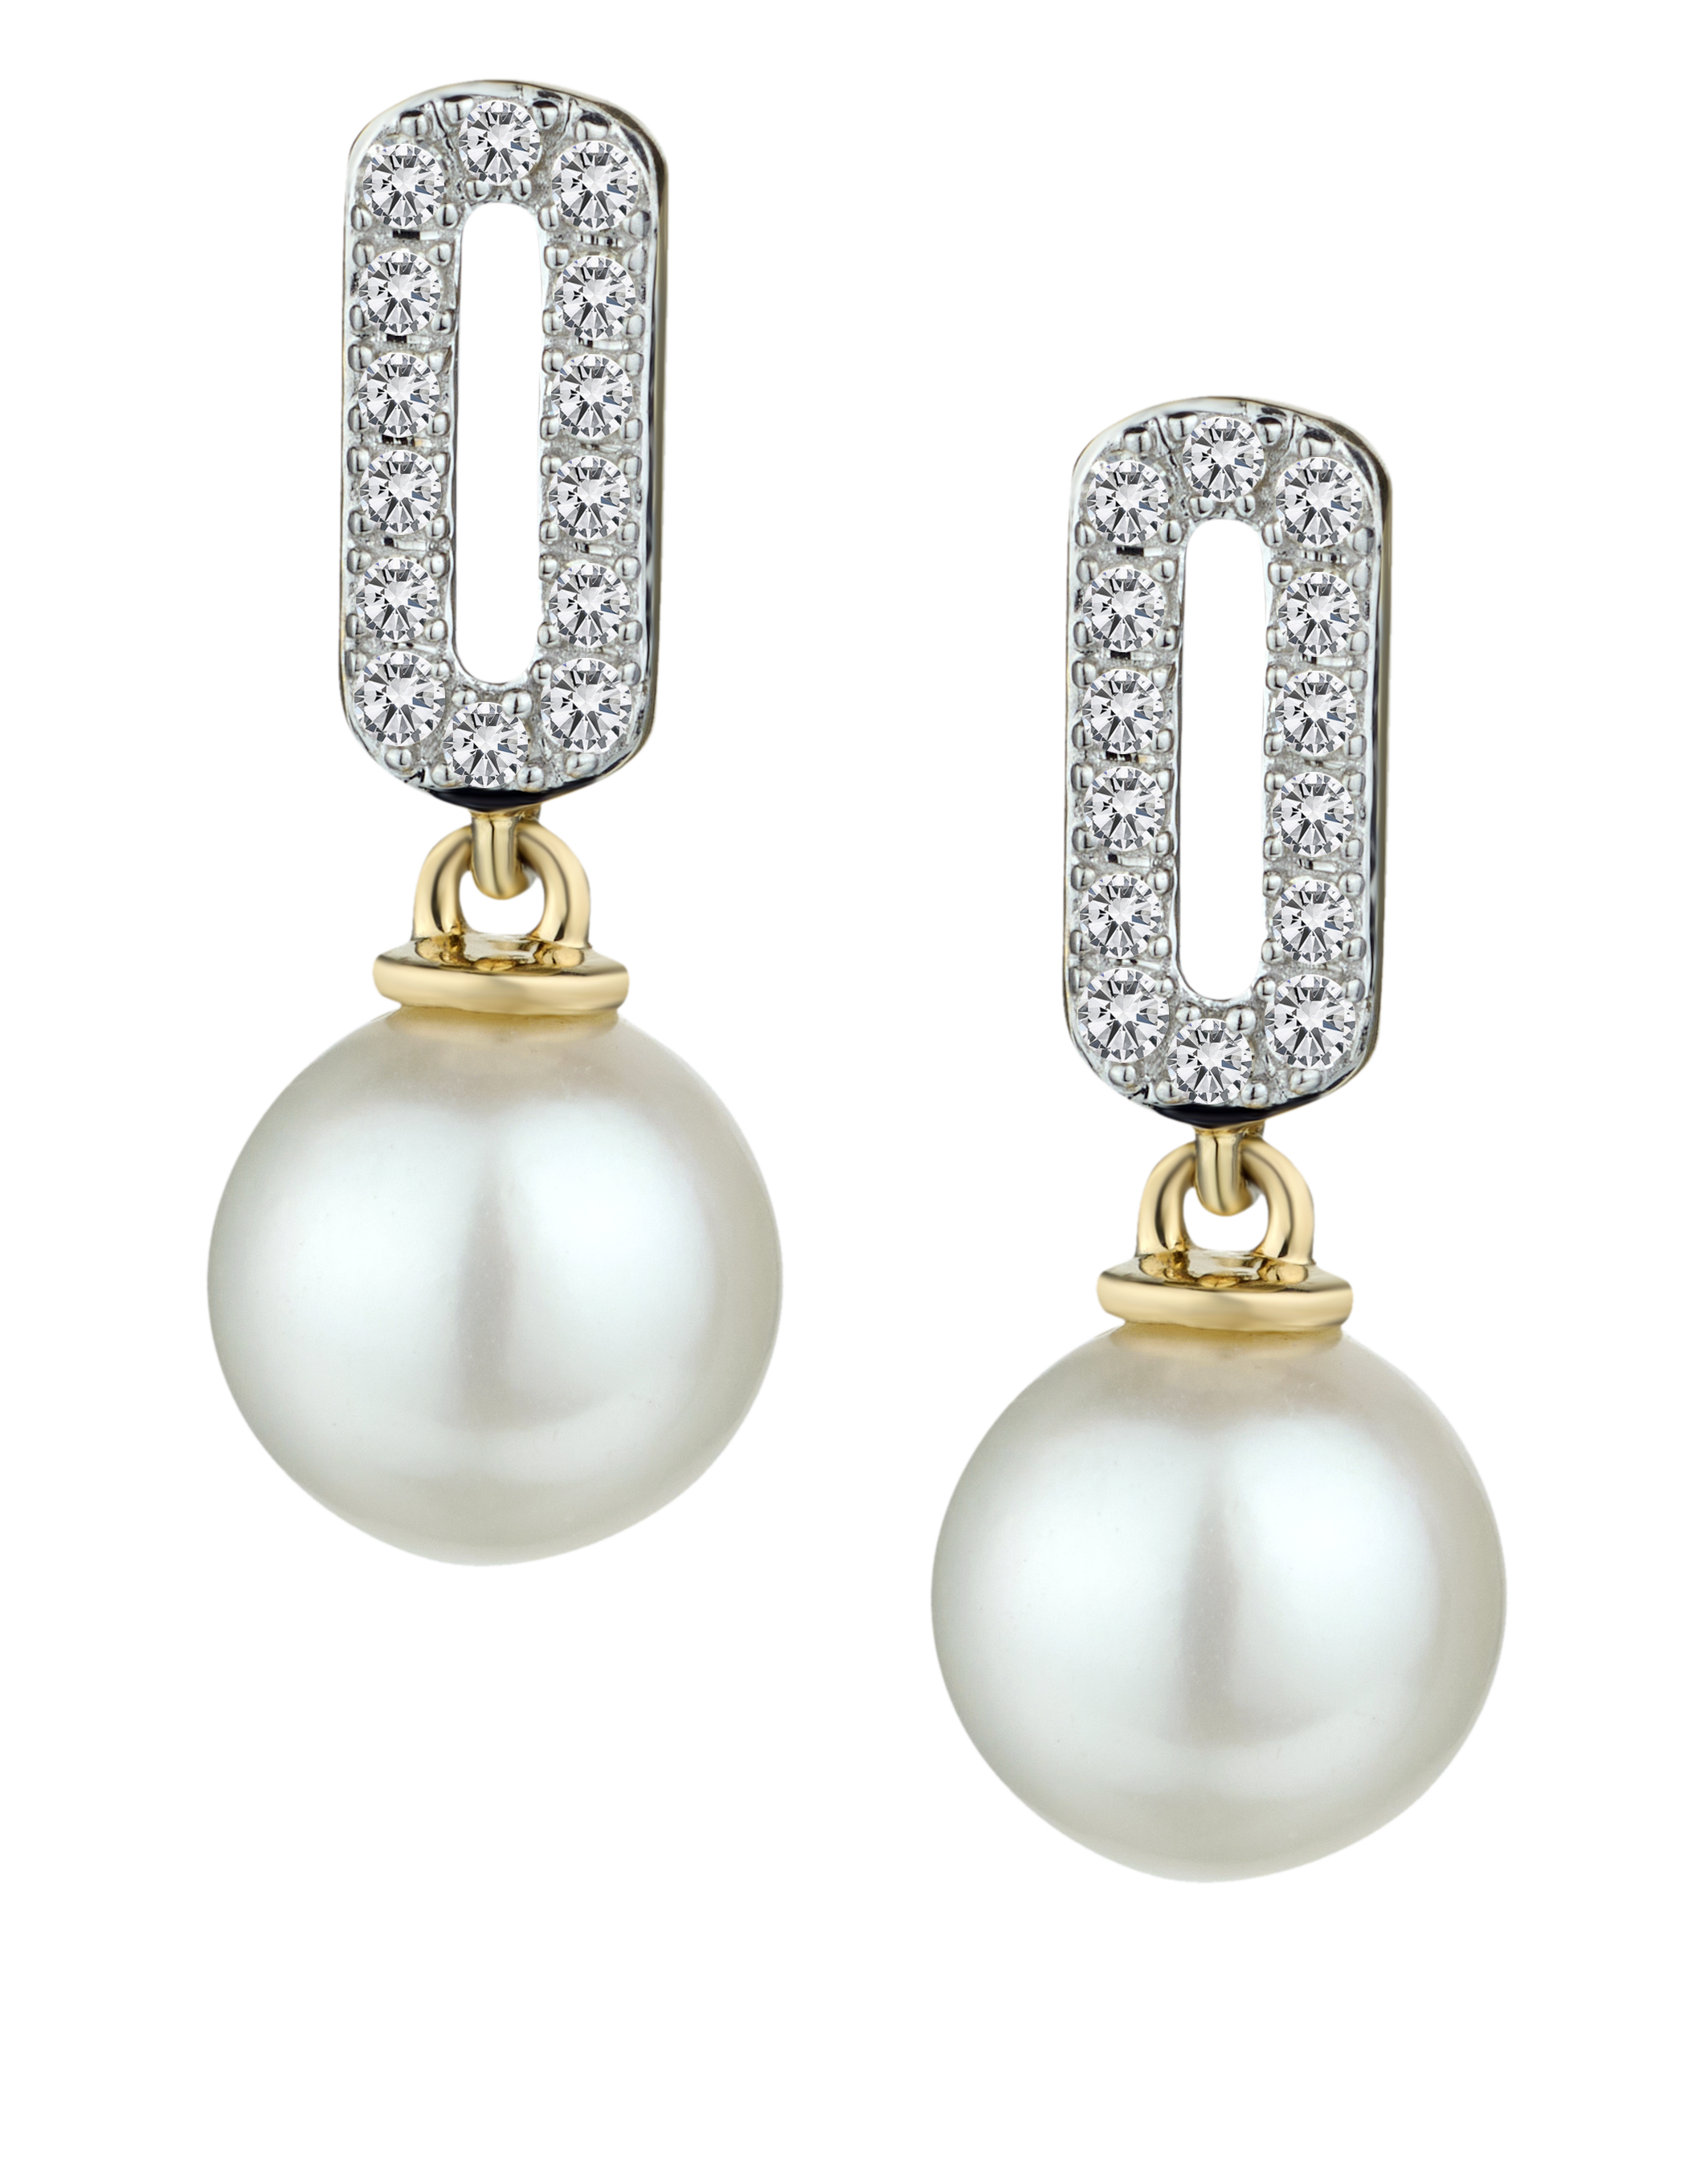 .12 Carat of Diamonds & Pearl Earrings, 10kt Yellow Gold.....................NOW